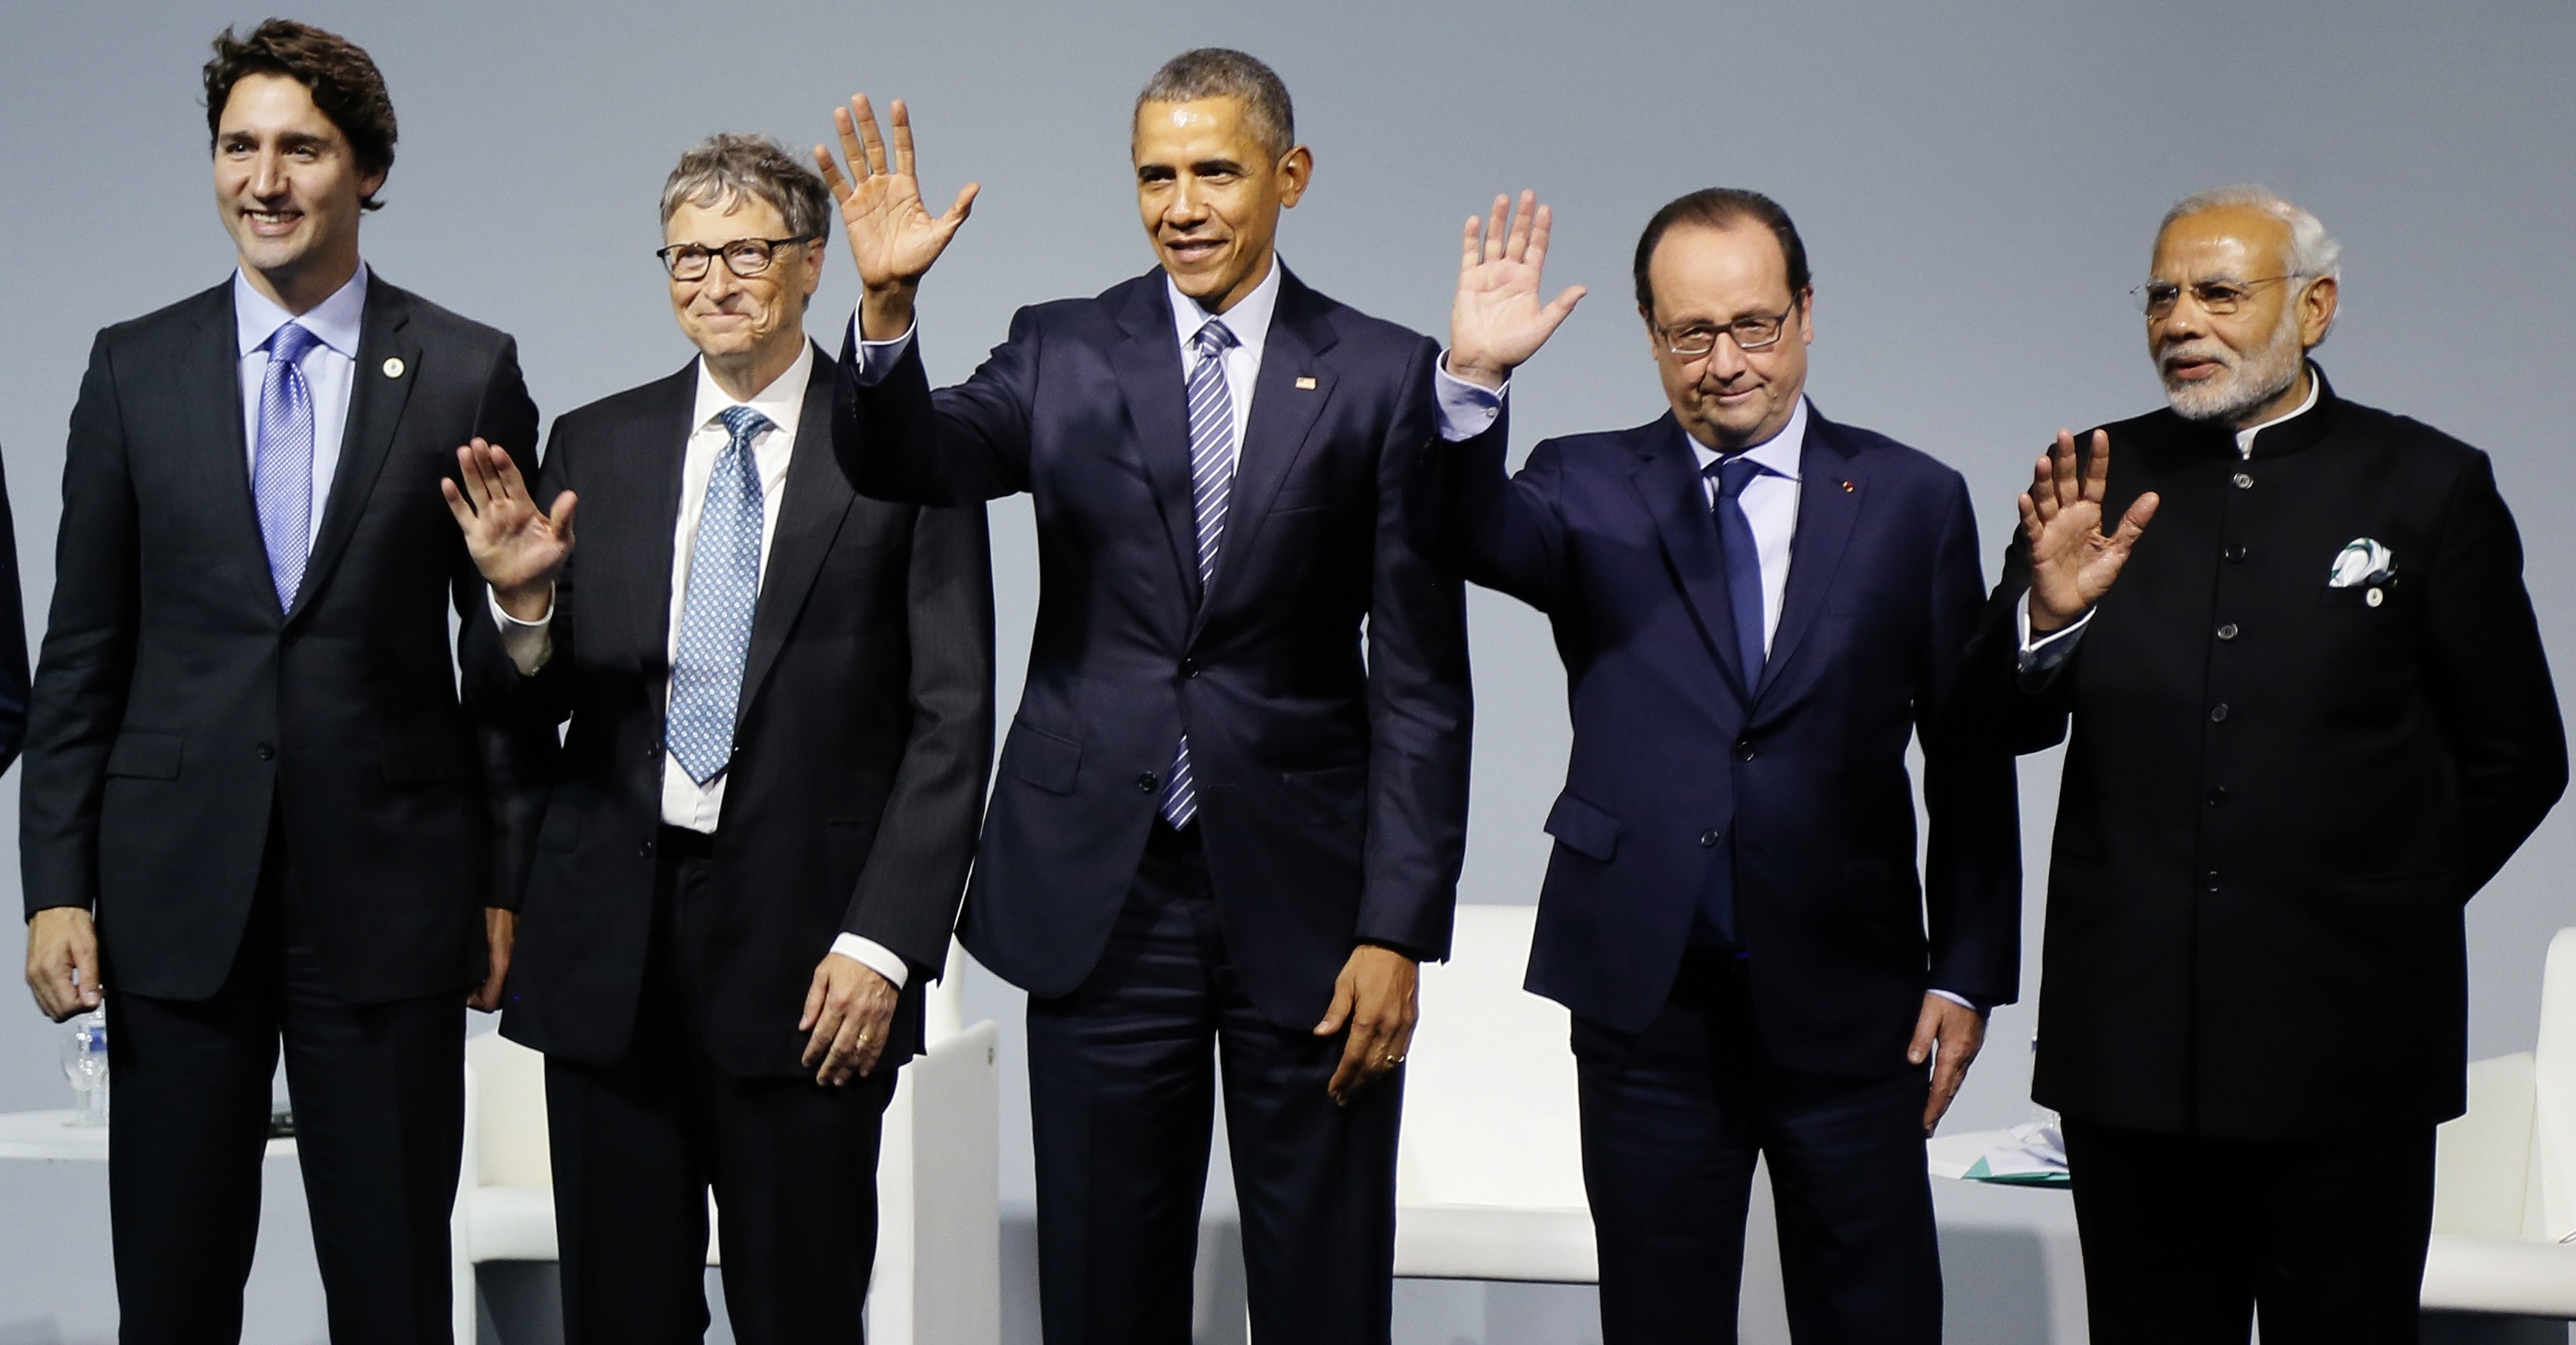 Canadian Prime Minister Trudeau, Microsoft co-founder Gates, US President Obama, French President Hollande and Indian Prime Minister Modi attend a meeting to launch the 'Mission Innovation: Accelerating the Clean Energy Revolution' at Le Bourget